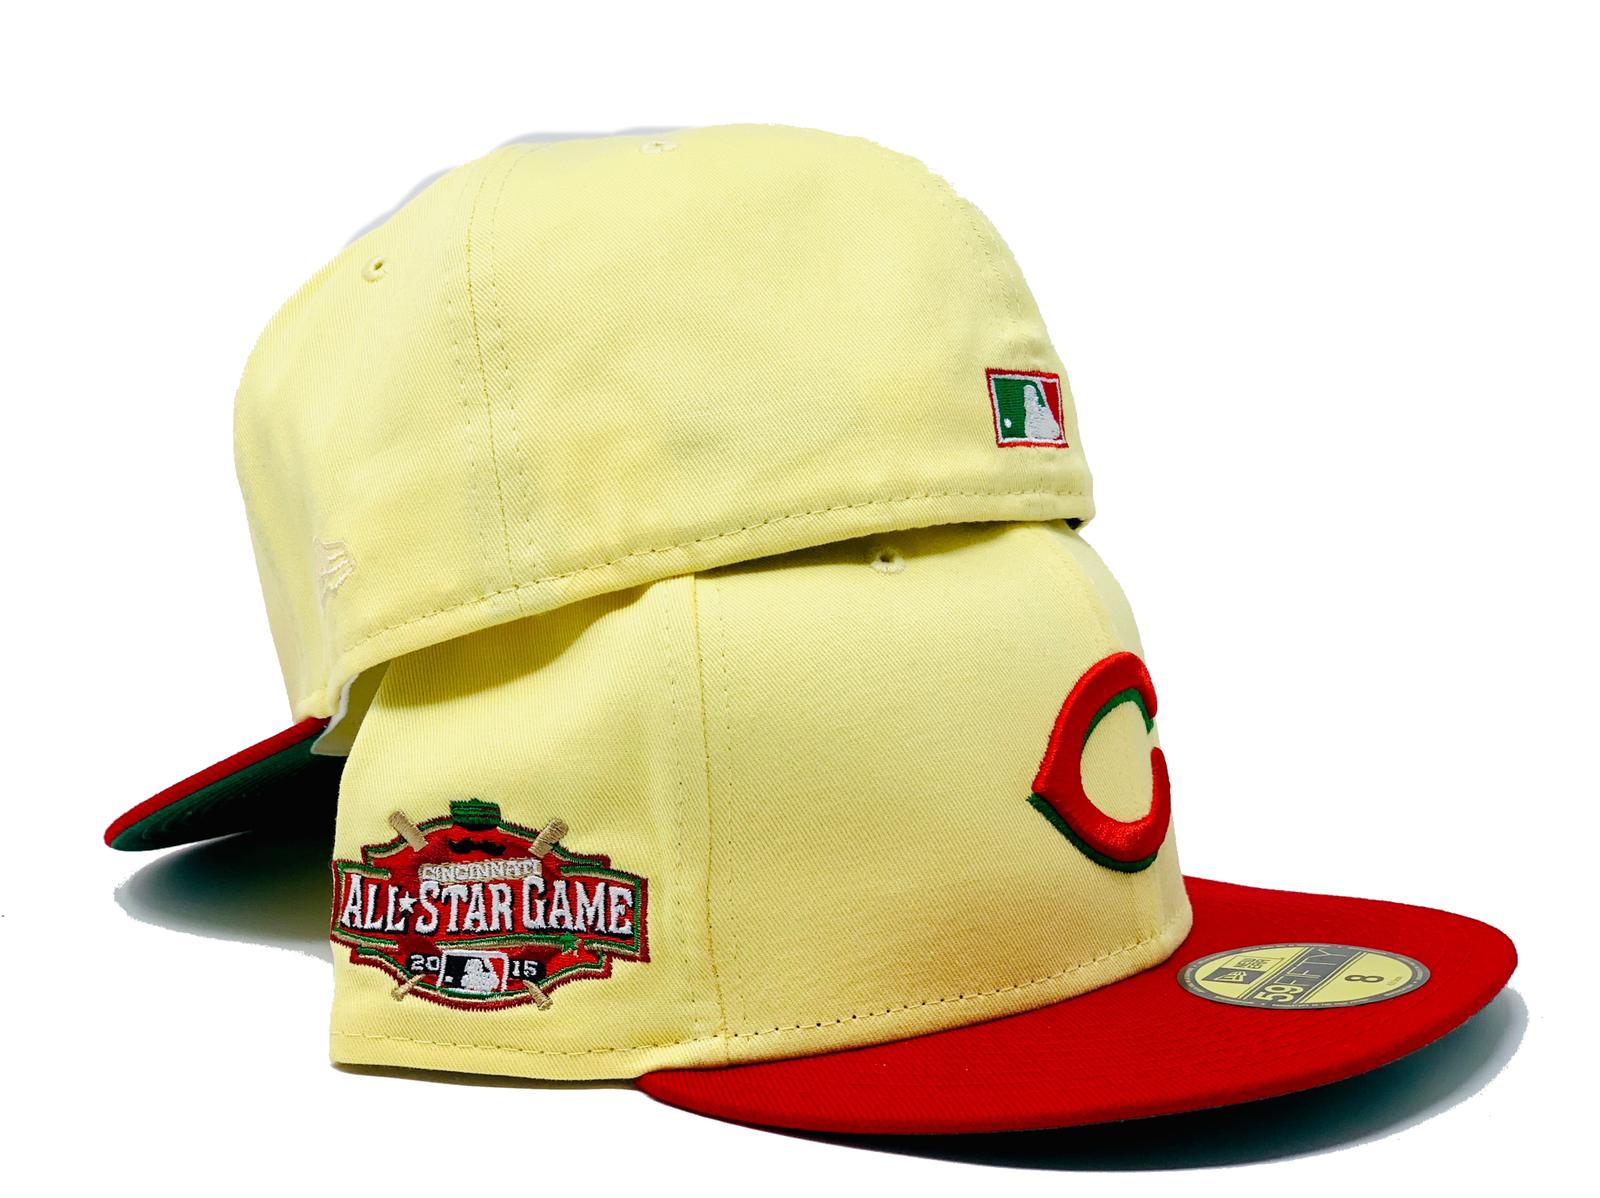 Are These the 2015 MLB All-Star Game Official Hats?